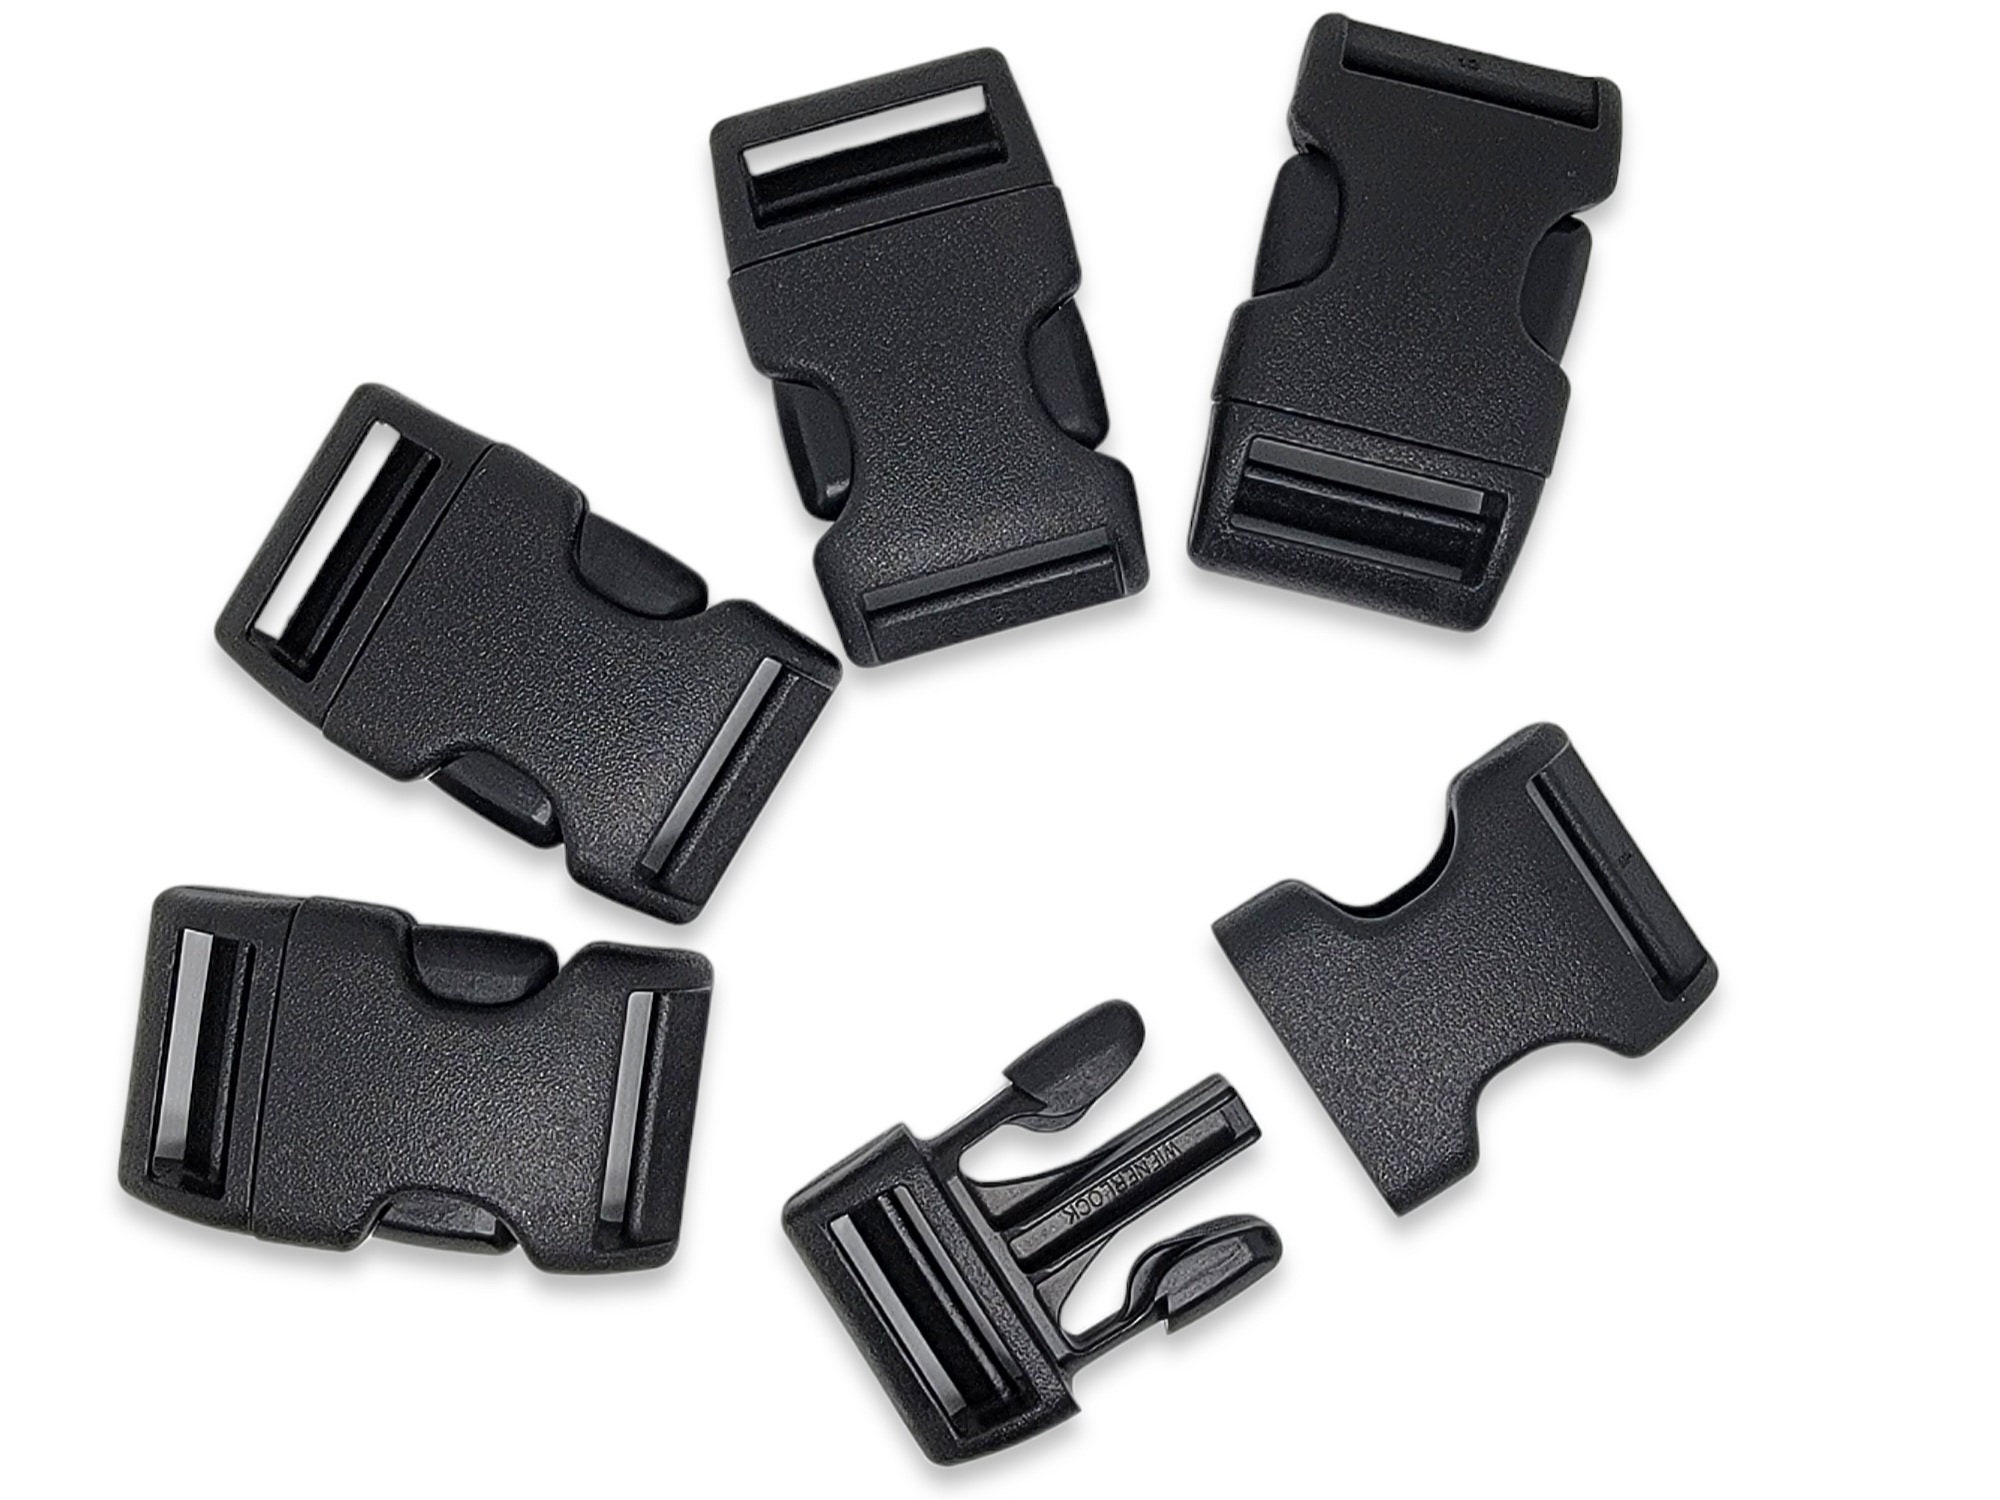 4 BUCKLES 1 1/2 or 2 Flat or Chamber SIDE RELEASE Buckle, 38mm or 51mm 